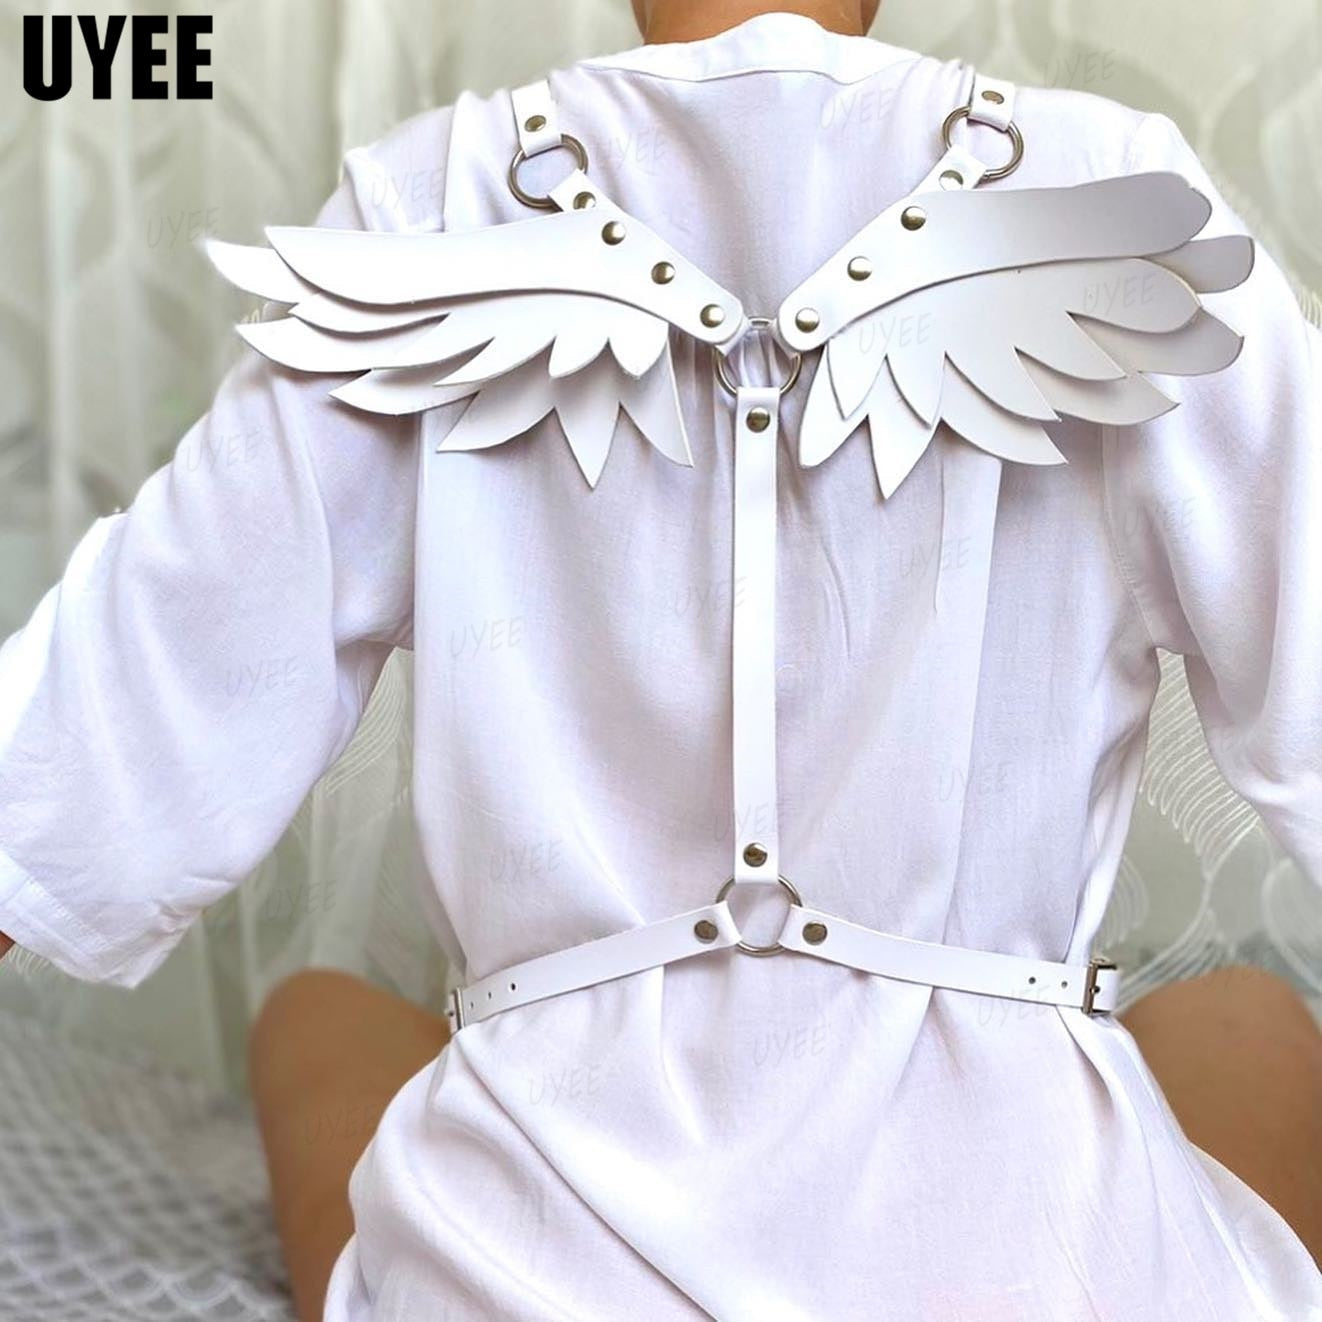 Angel Wings Leather Harness